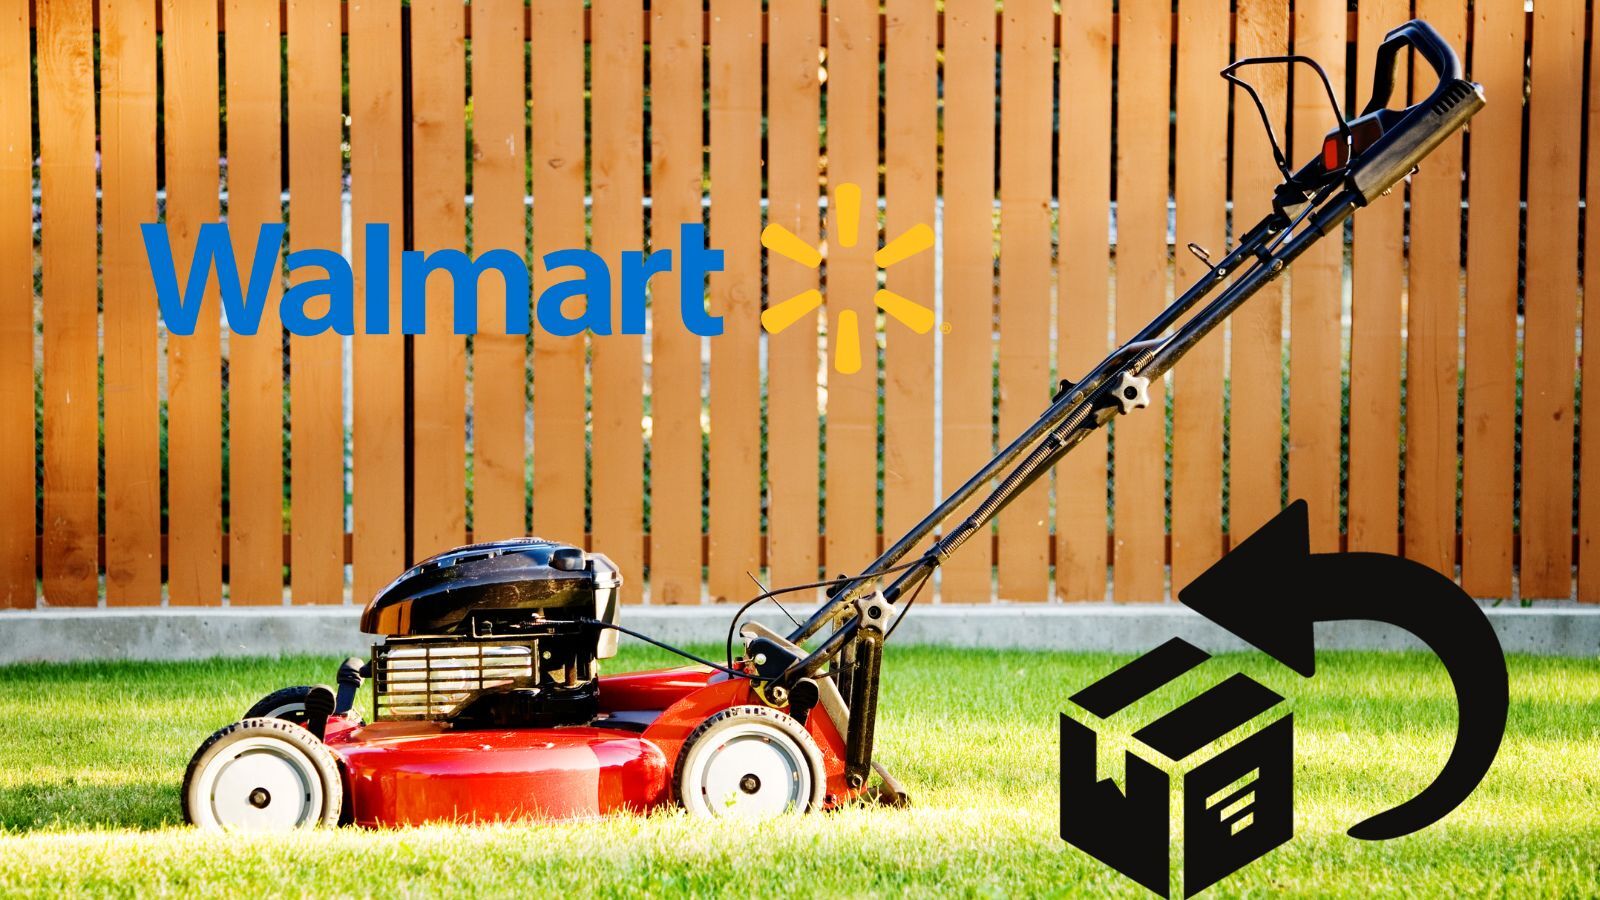 Walmart Lawn Mower Return Policy (Time, Without Receipt, Used, and More)